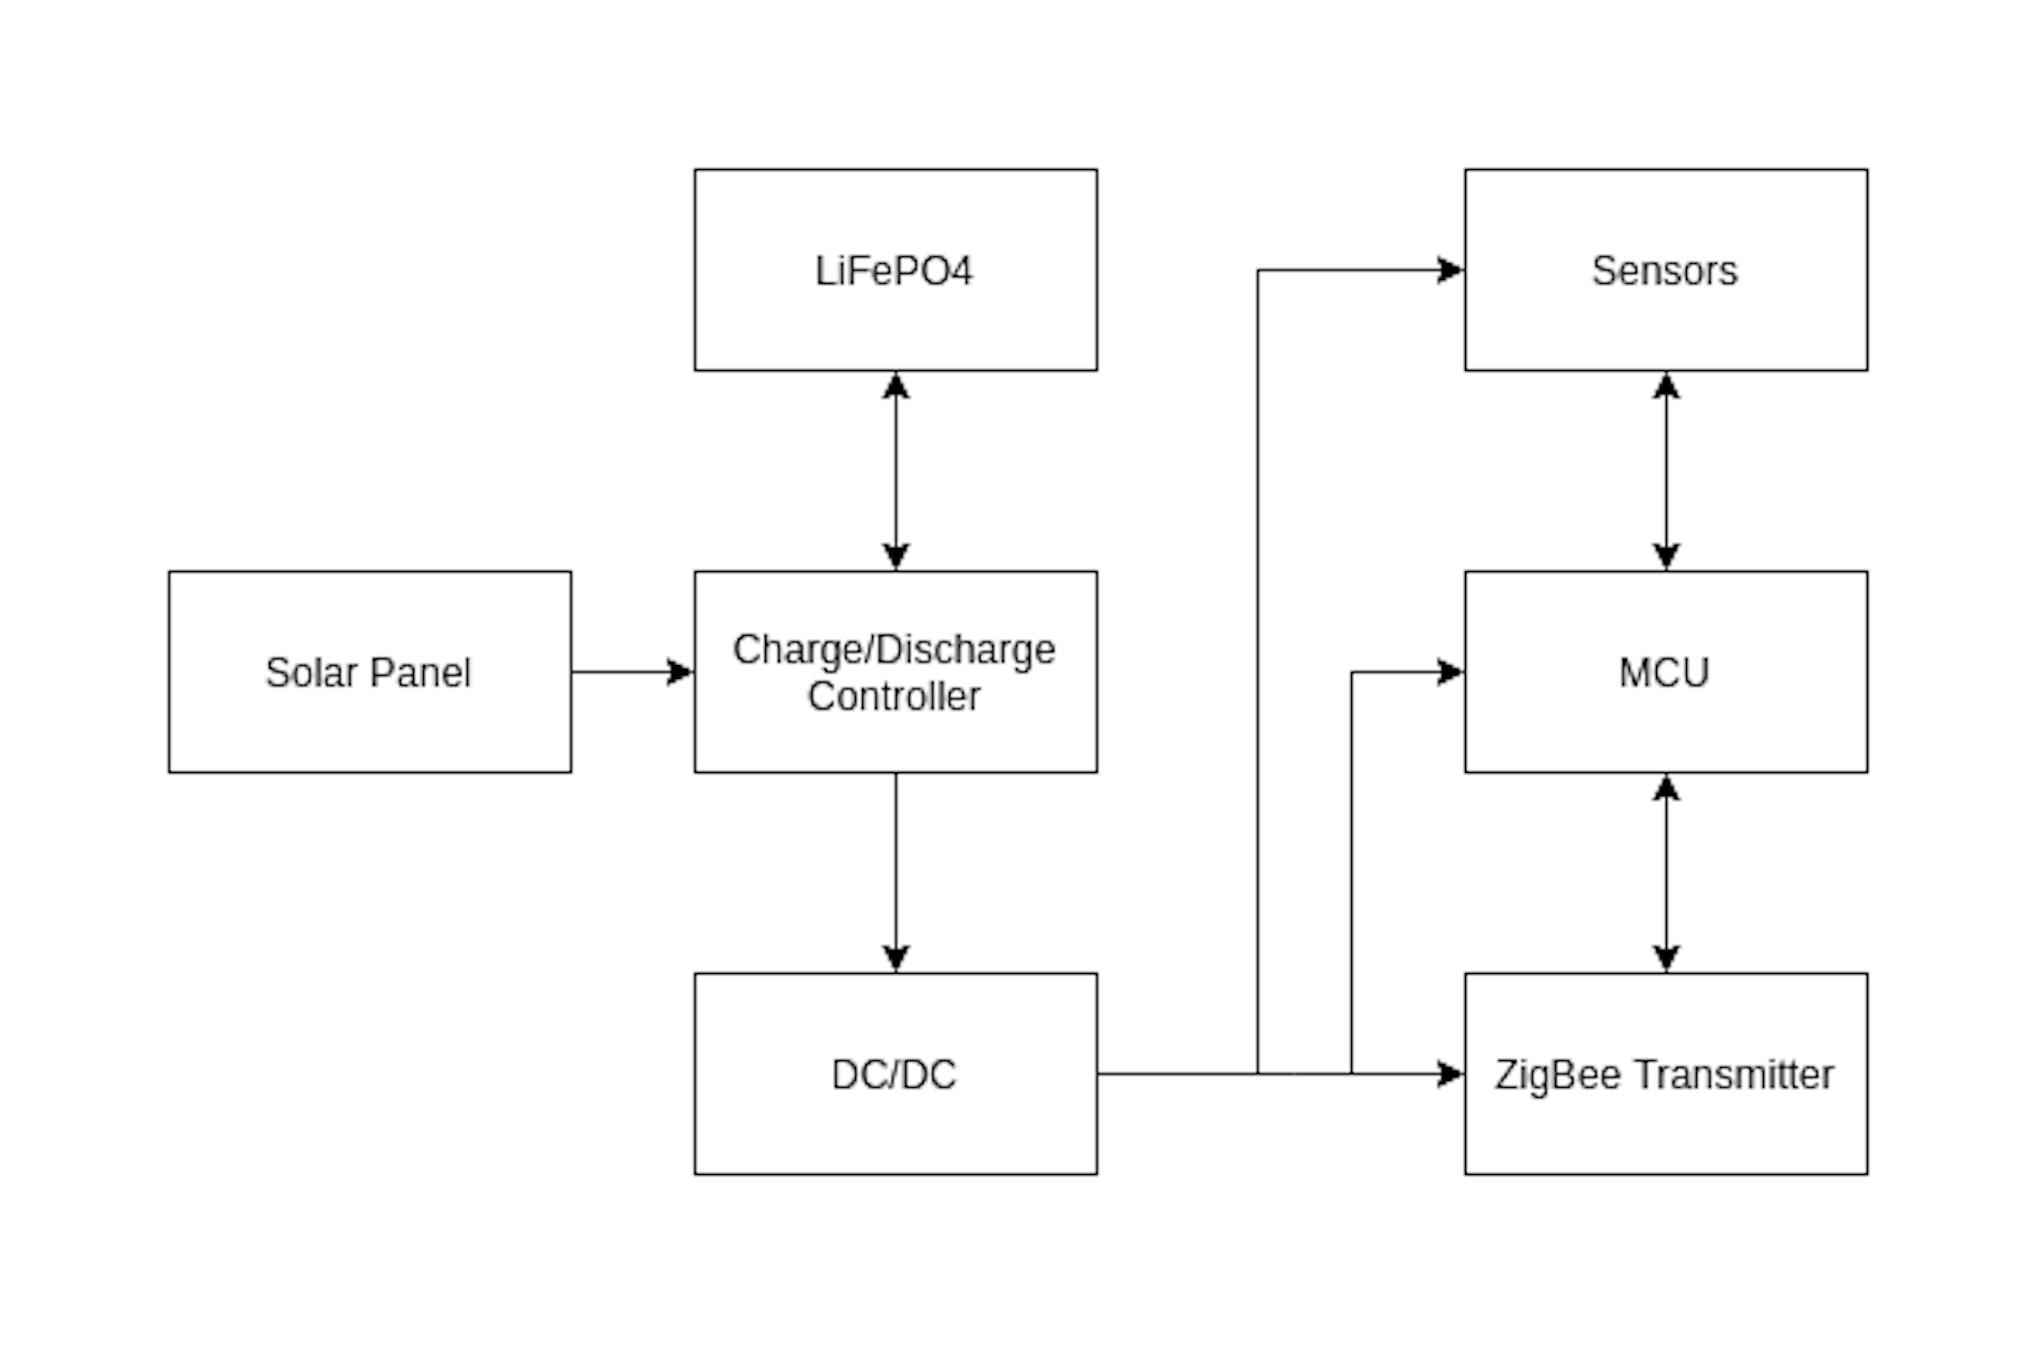 The Block Diagram of the Device.